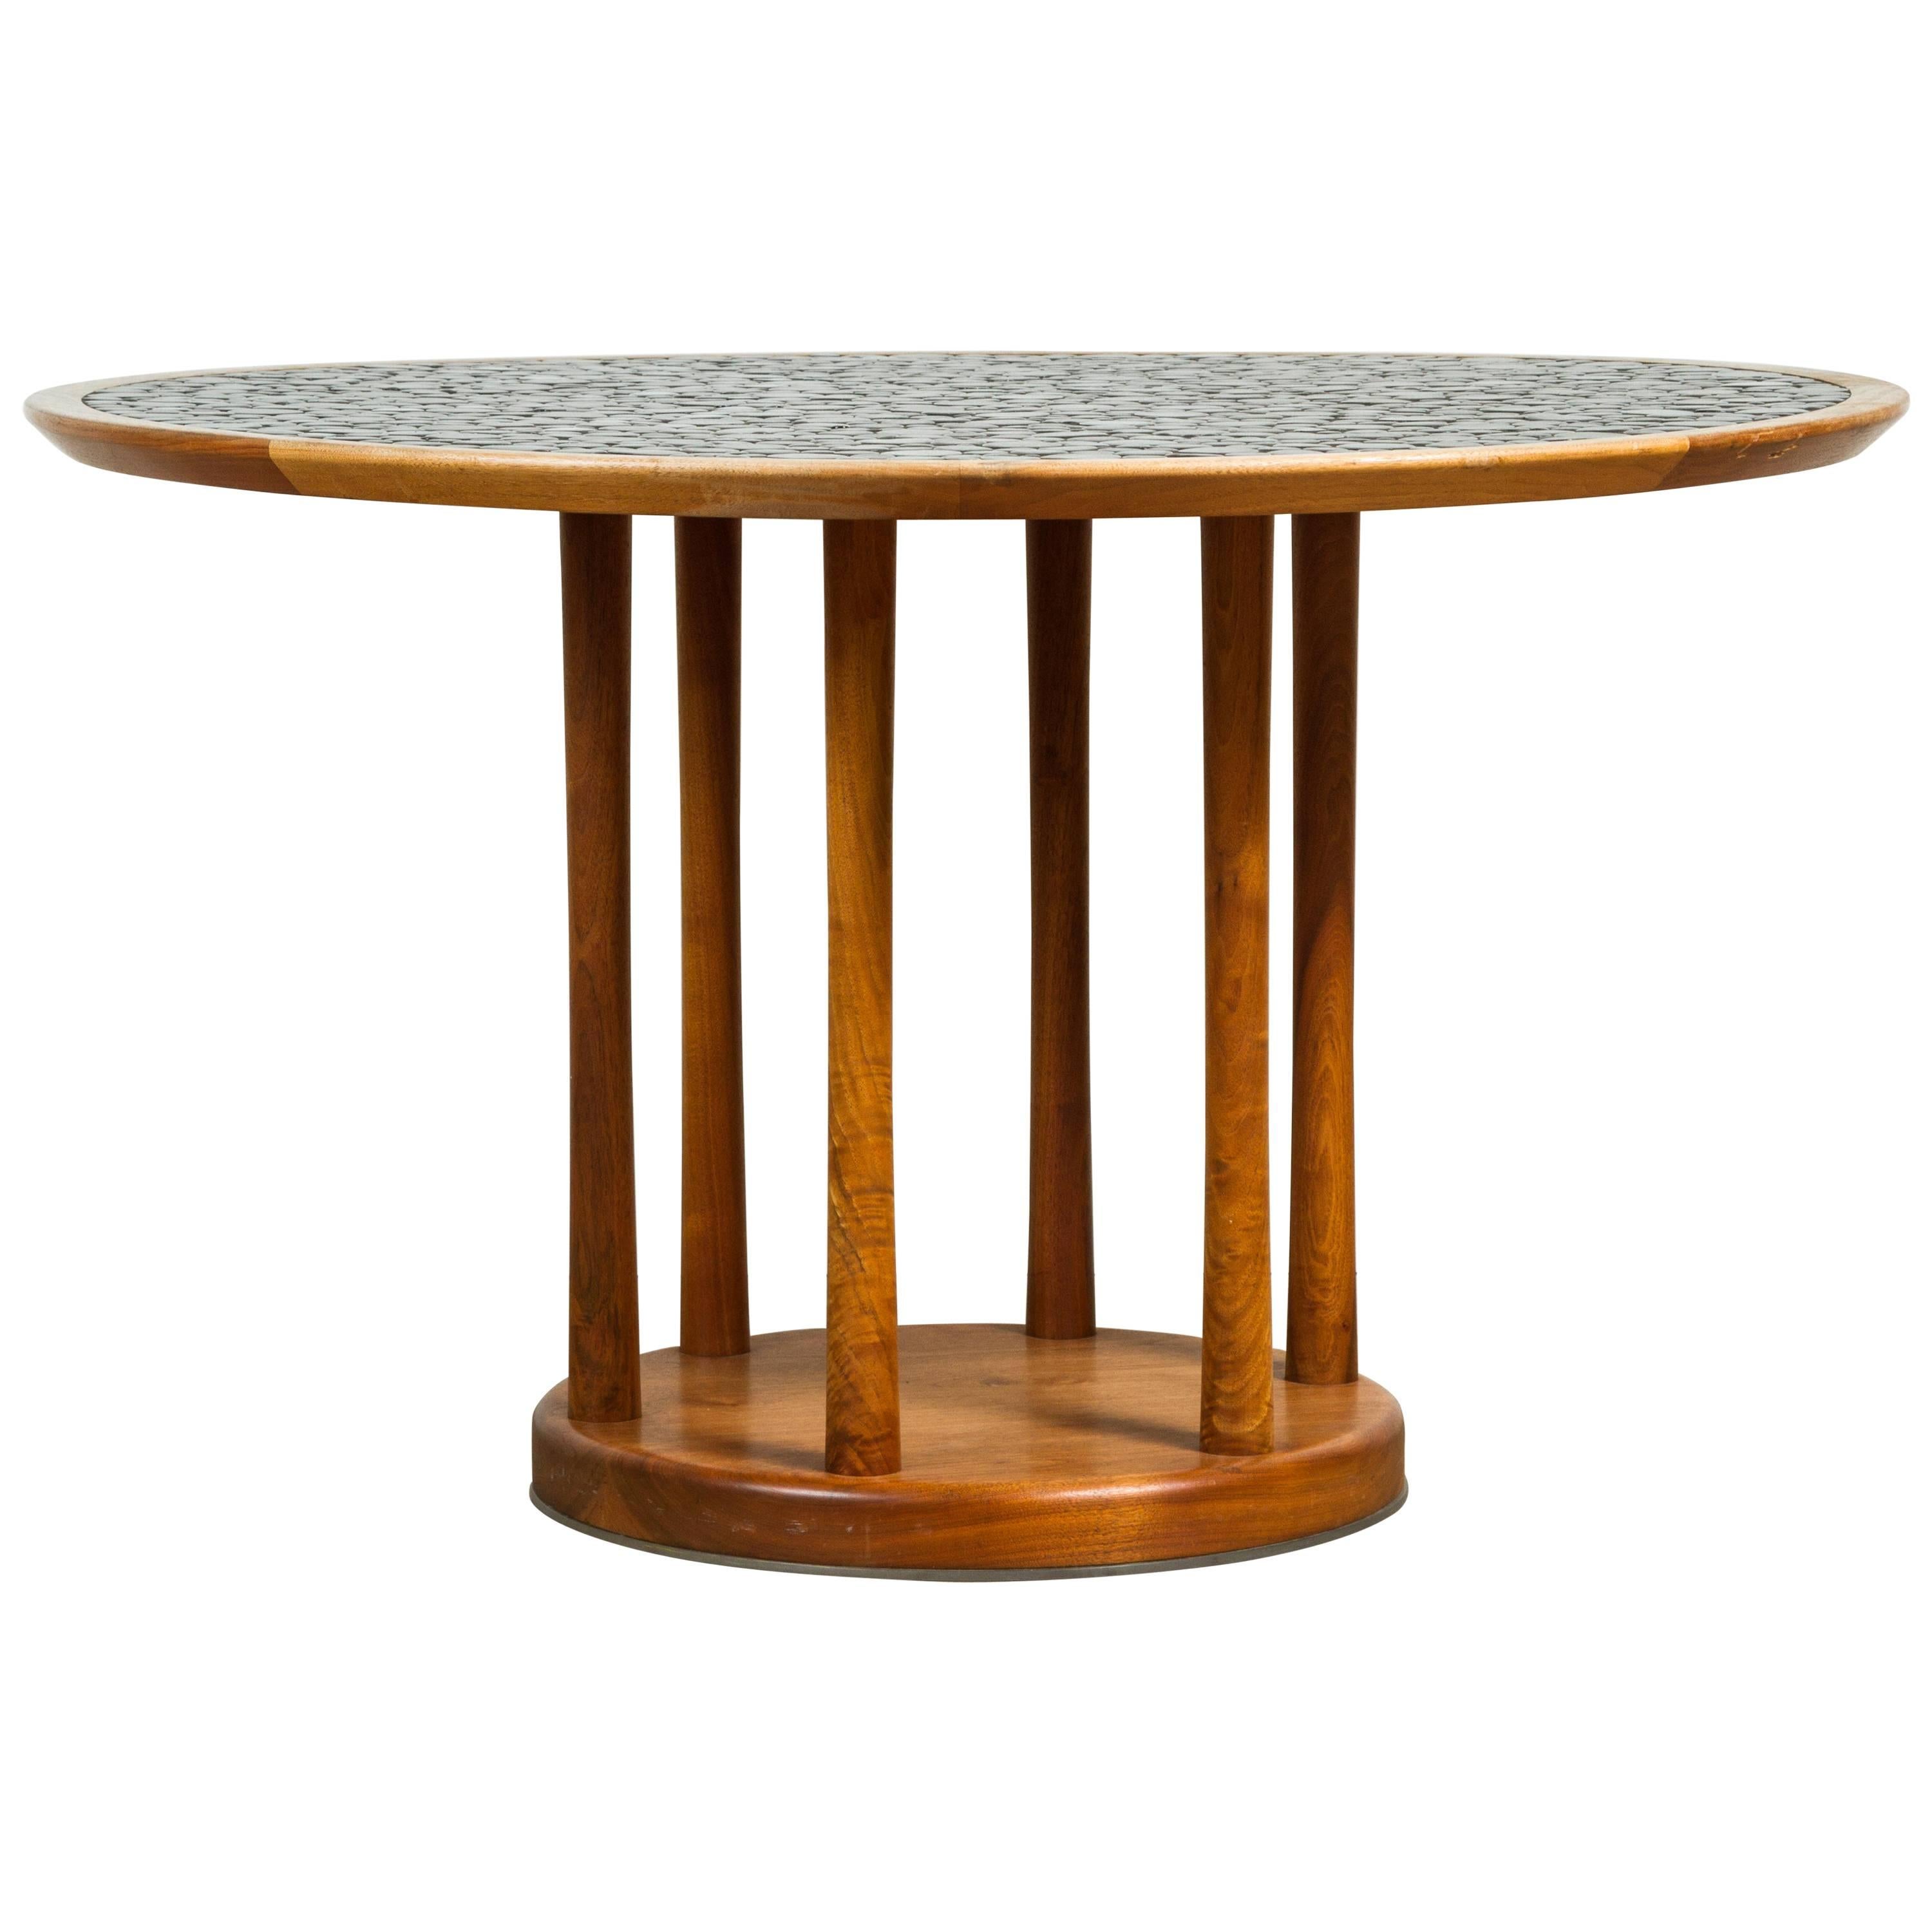 Round Studio Tiled Centre Table by Martz